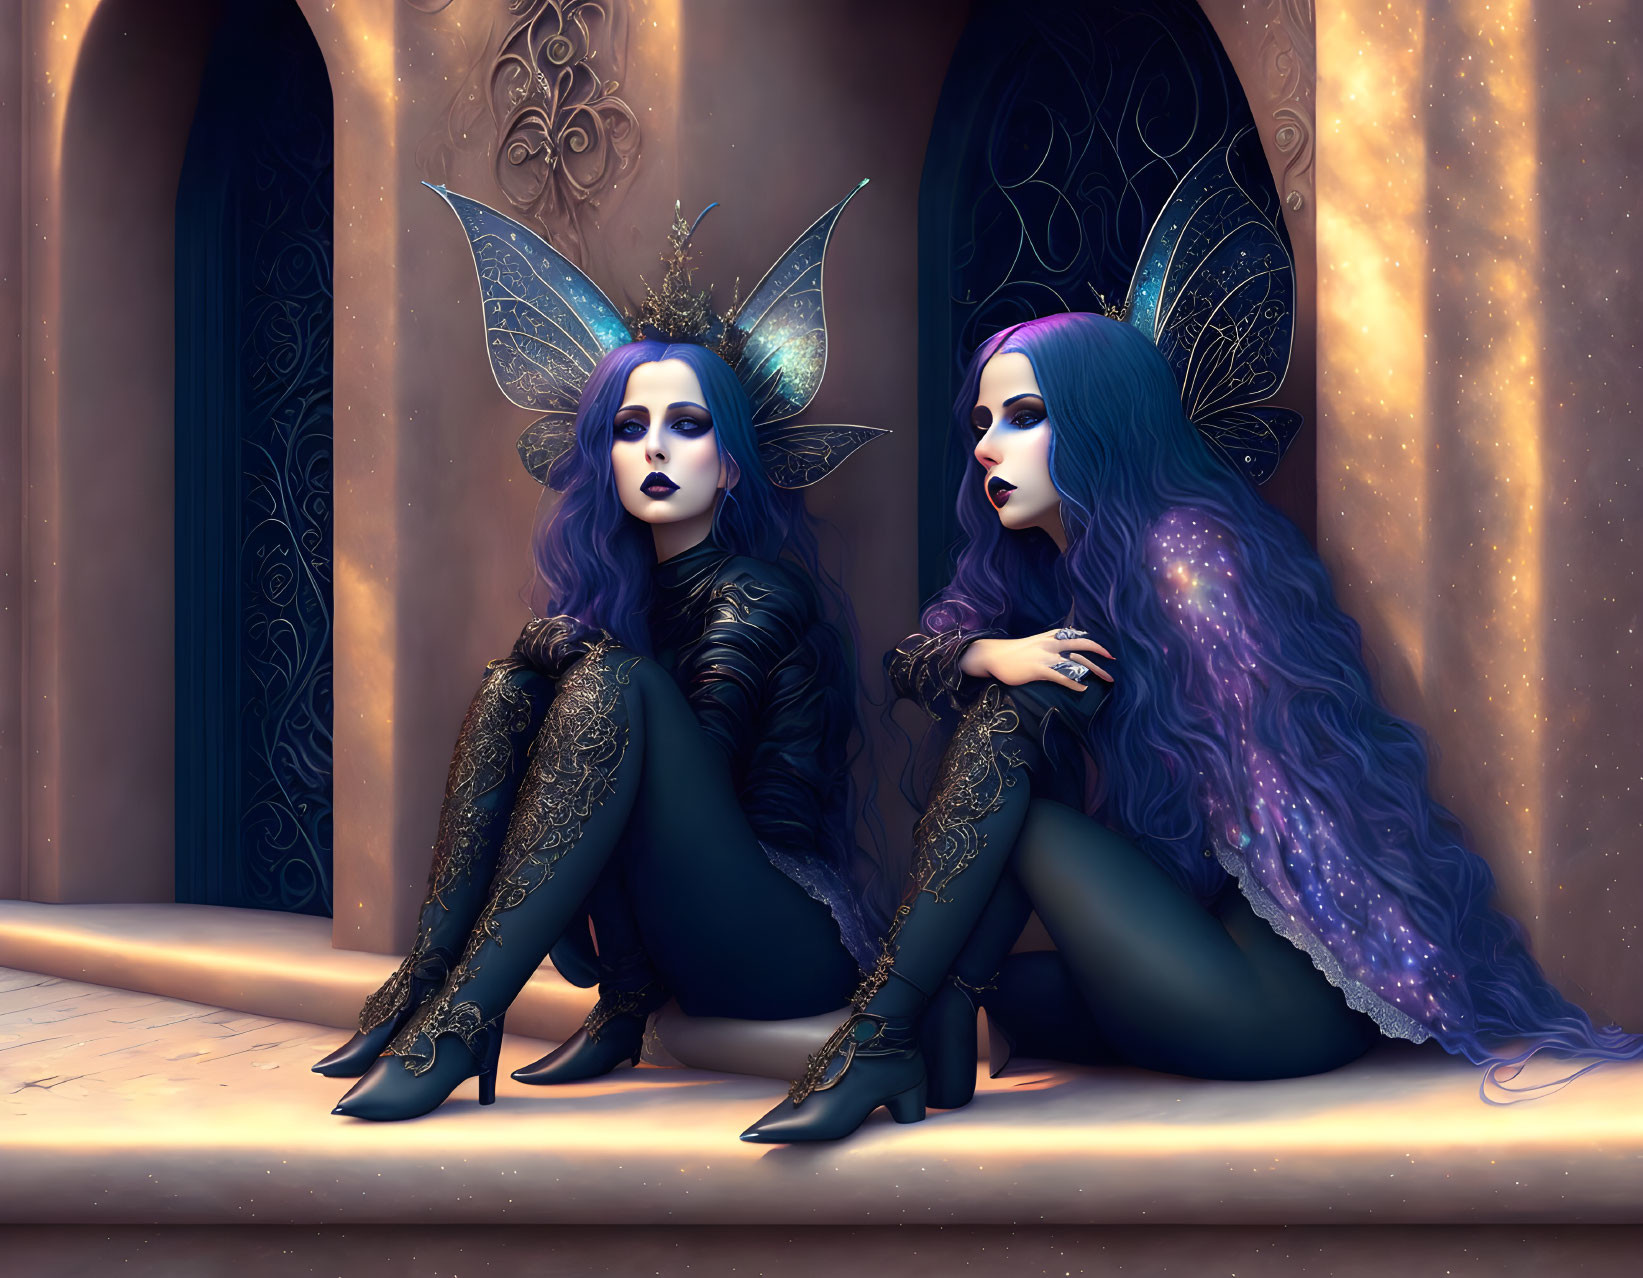 Fantasy characters with blue and purple hair in winged costumes by golden doorway